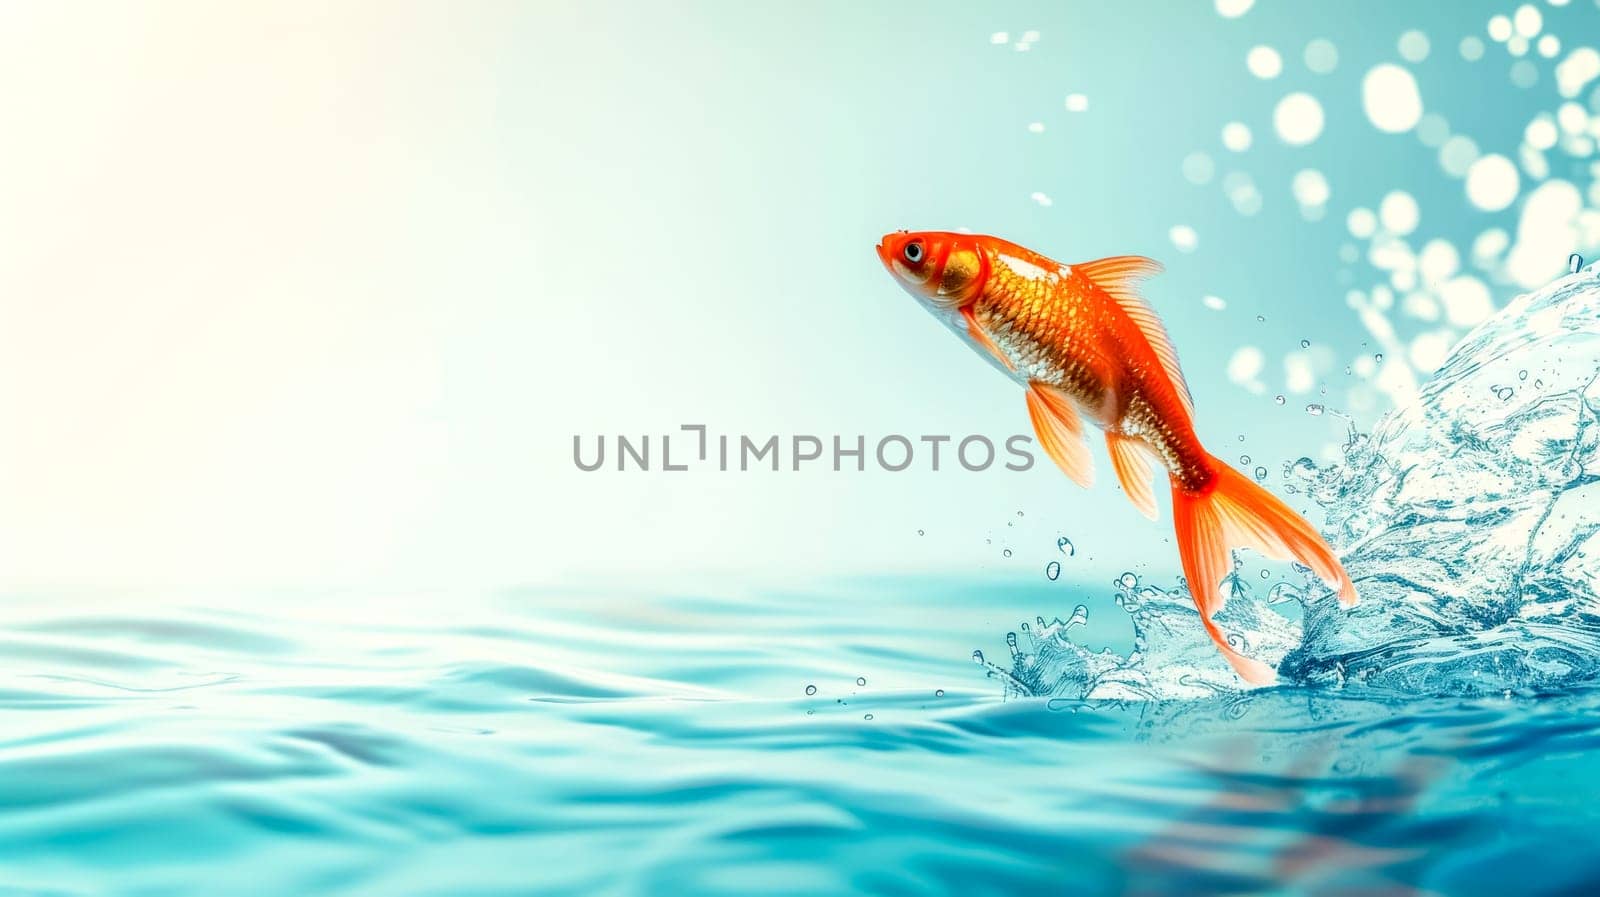 Golden fish jumping out of water with bubbles by Edophoto